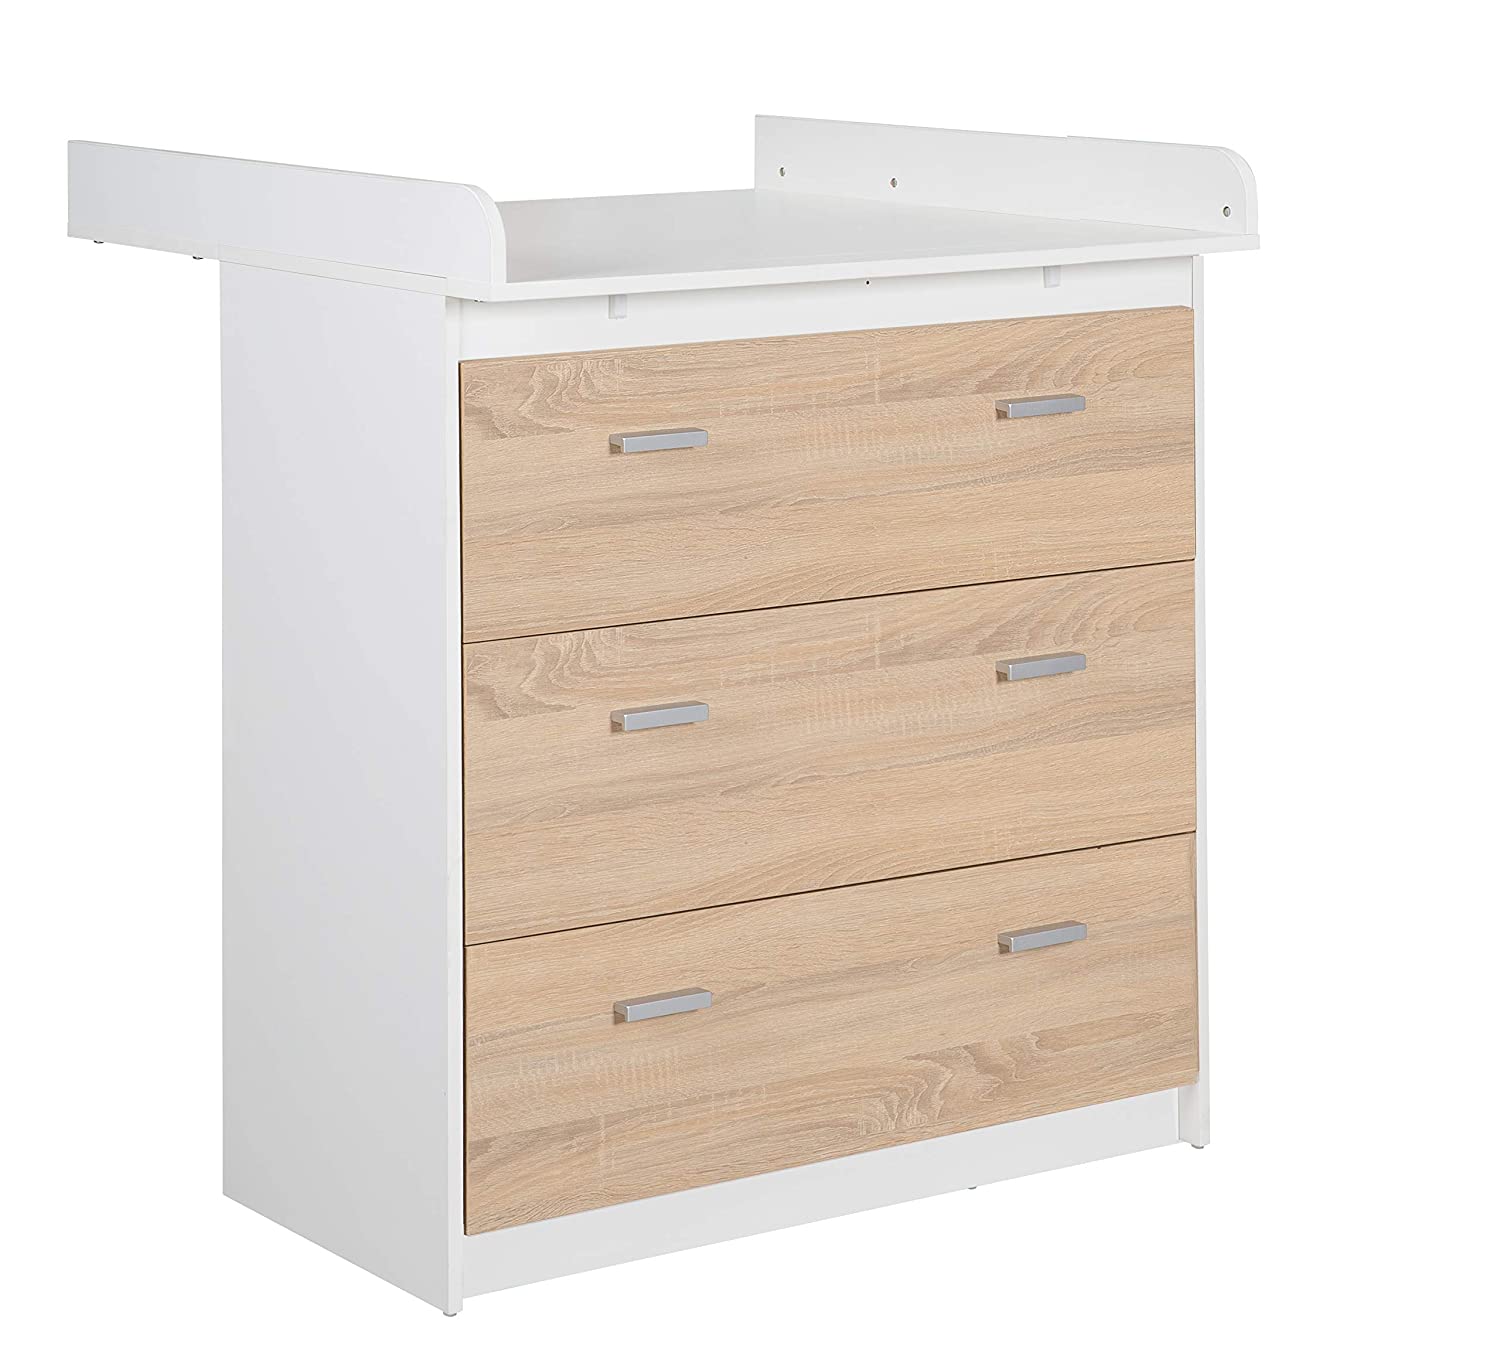 Roba Gabriella Changing Table with Changing Attachment Two-Tone with Removable Changing Attachment and 3 Drawers Can be Used as Chest of Drawers Height 90.5 cm